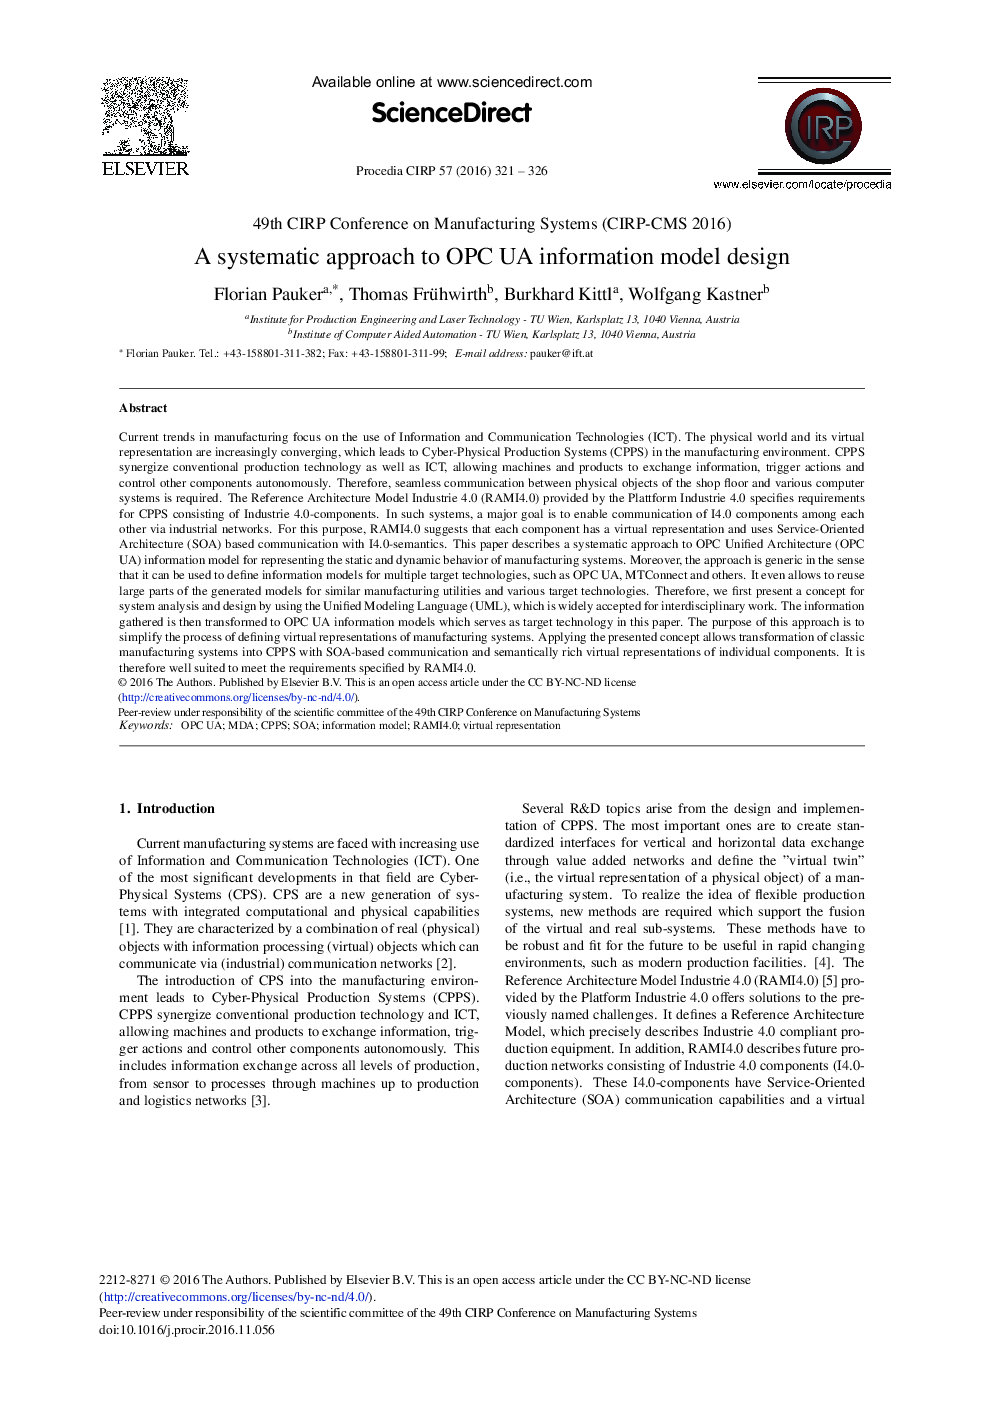 A Systematic Approach to OPC UA Information Model Design